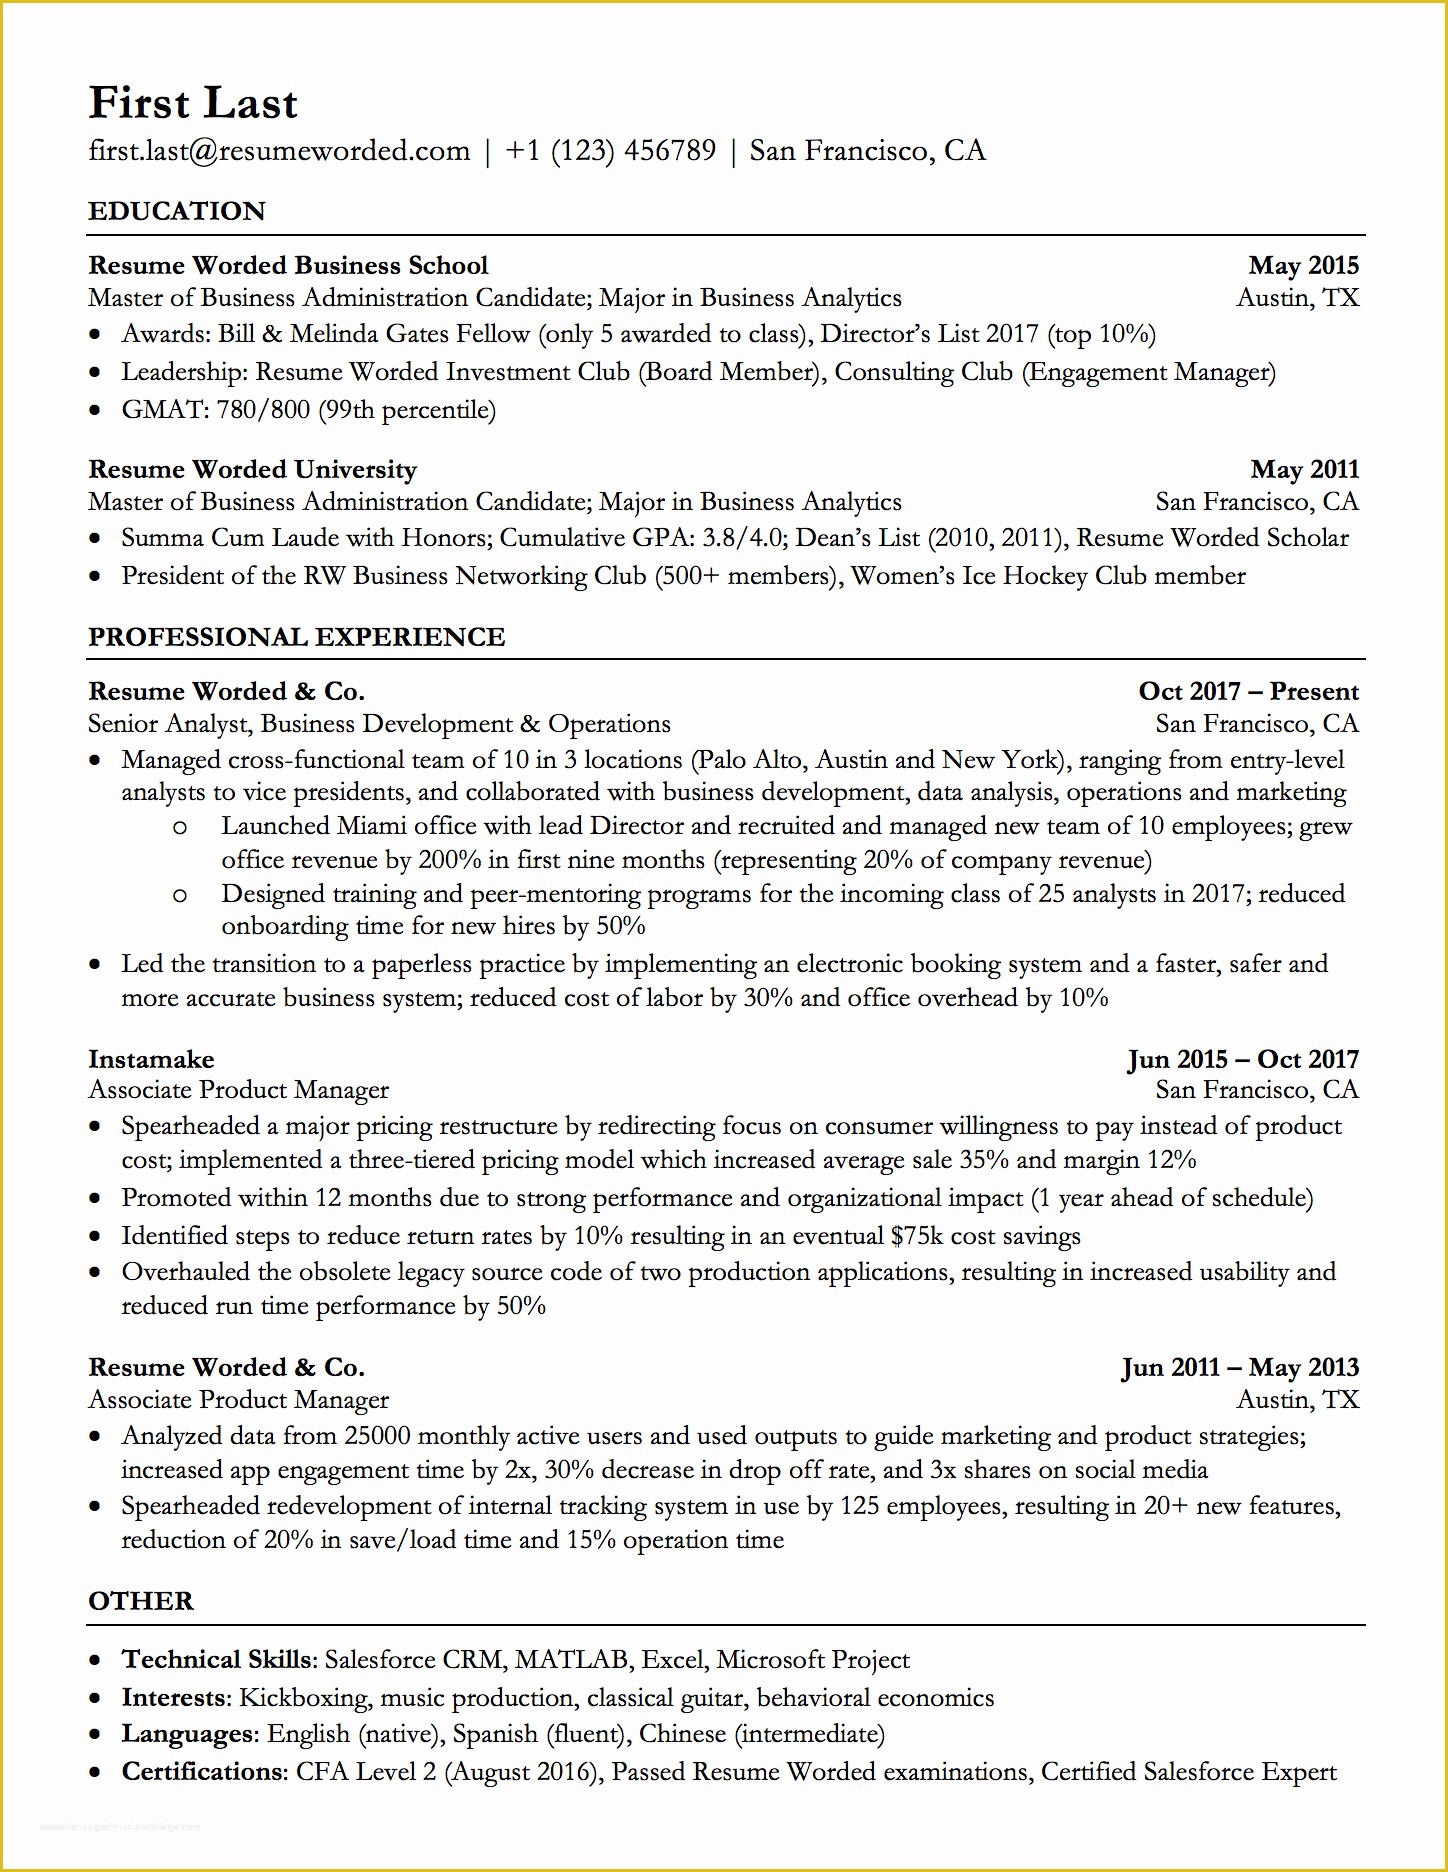 Free ats Resume Templates Of Professional ats Resume Templates for Experienced Hires